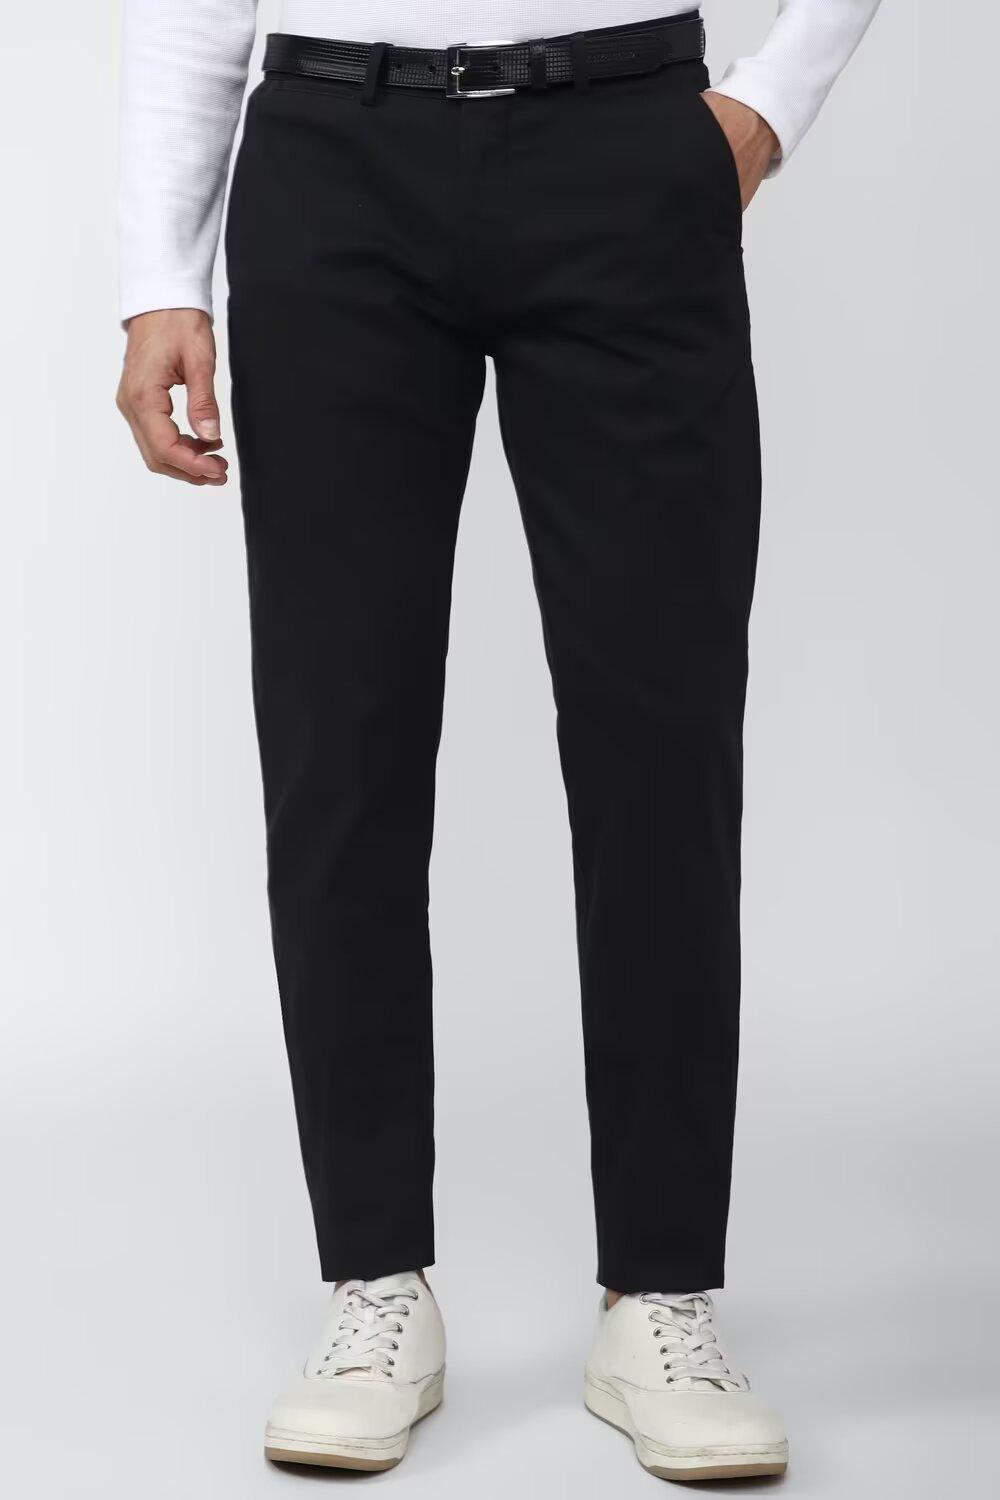 Buy Peter England Men Black Slim Fit Solid Formal Trousers - Trousers for  Men 4652827 | Myntra